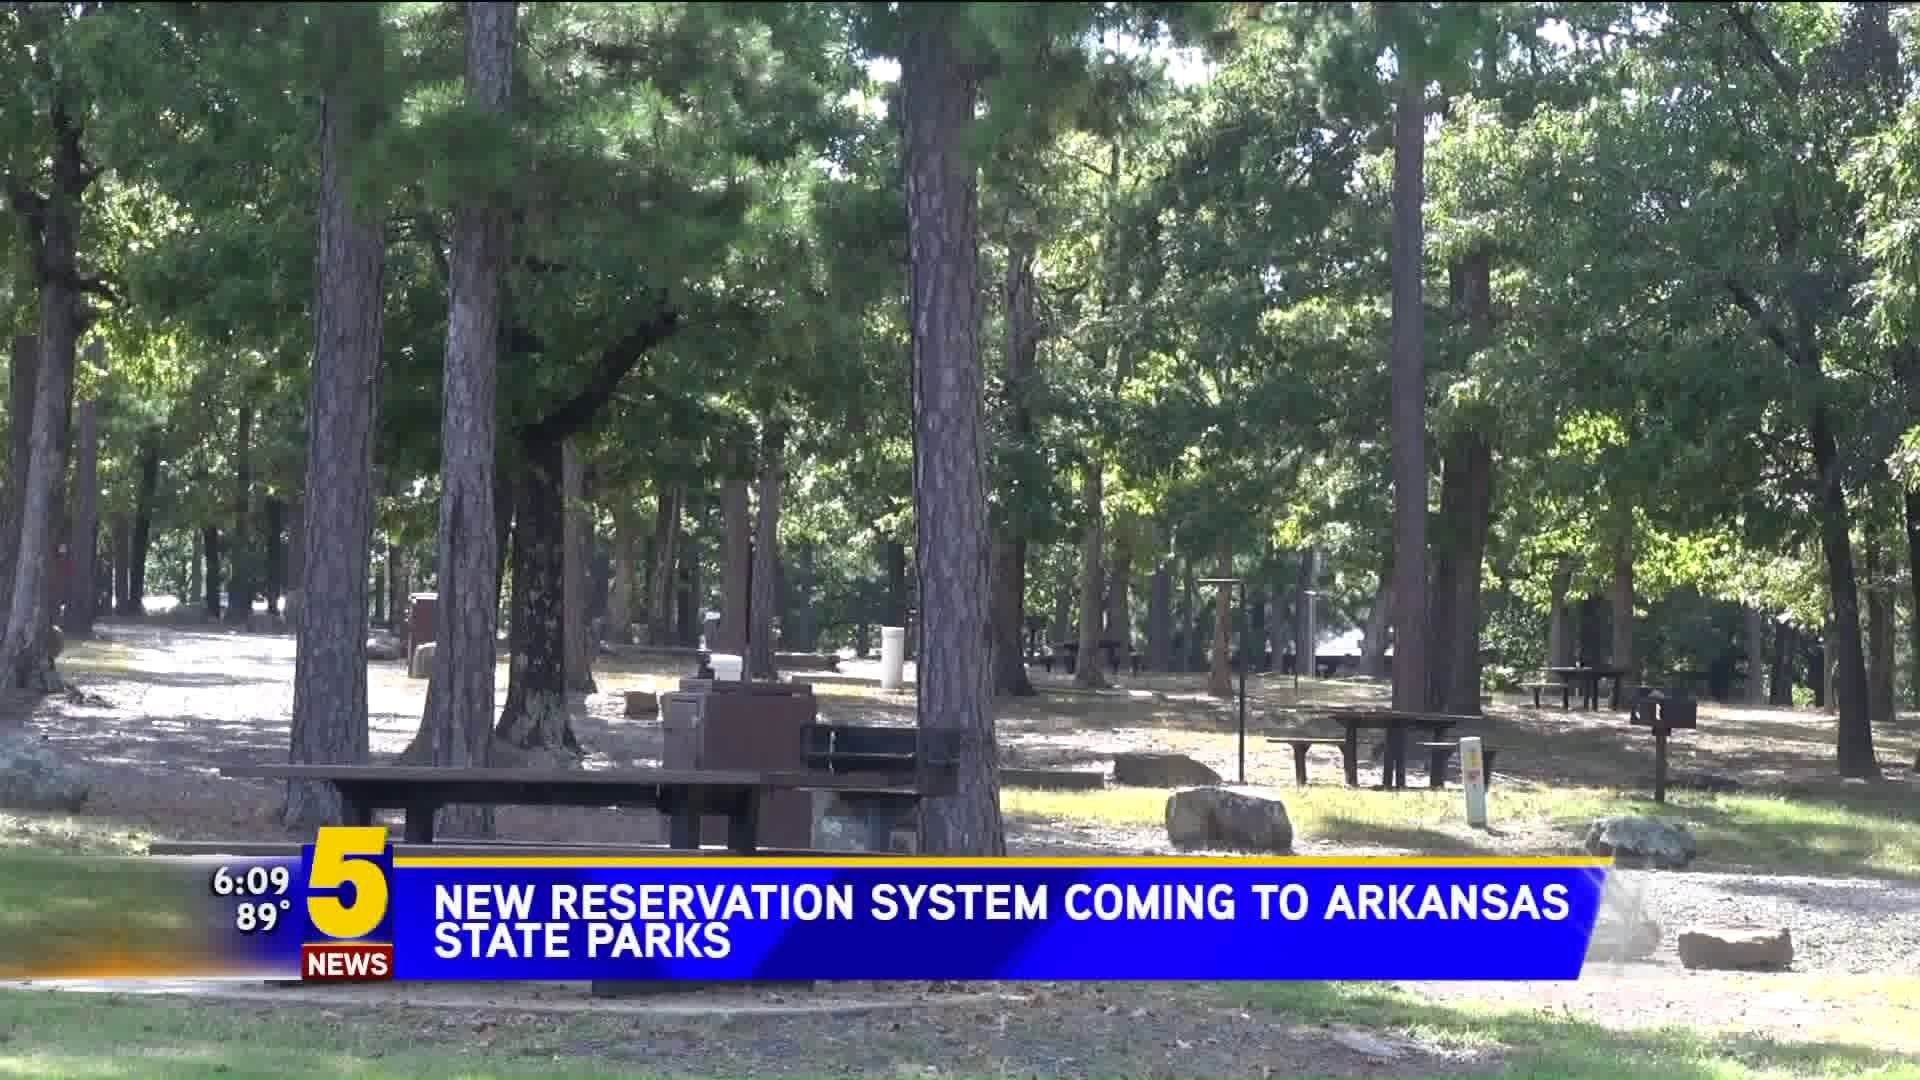 New Reservation System Coming To Arkansas State Parks